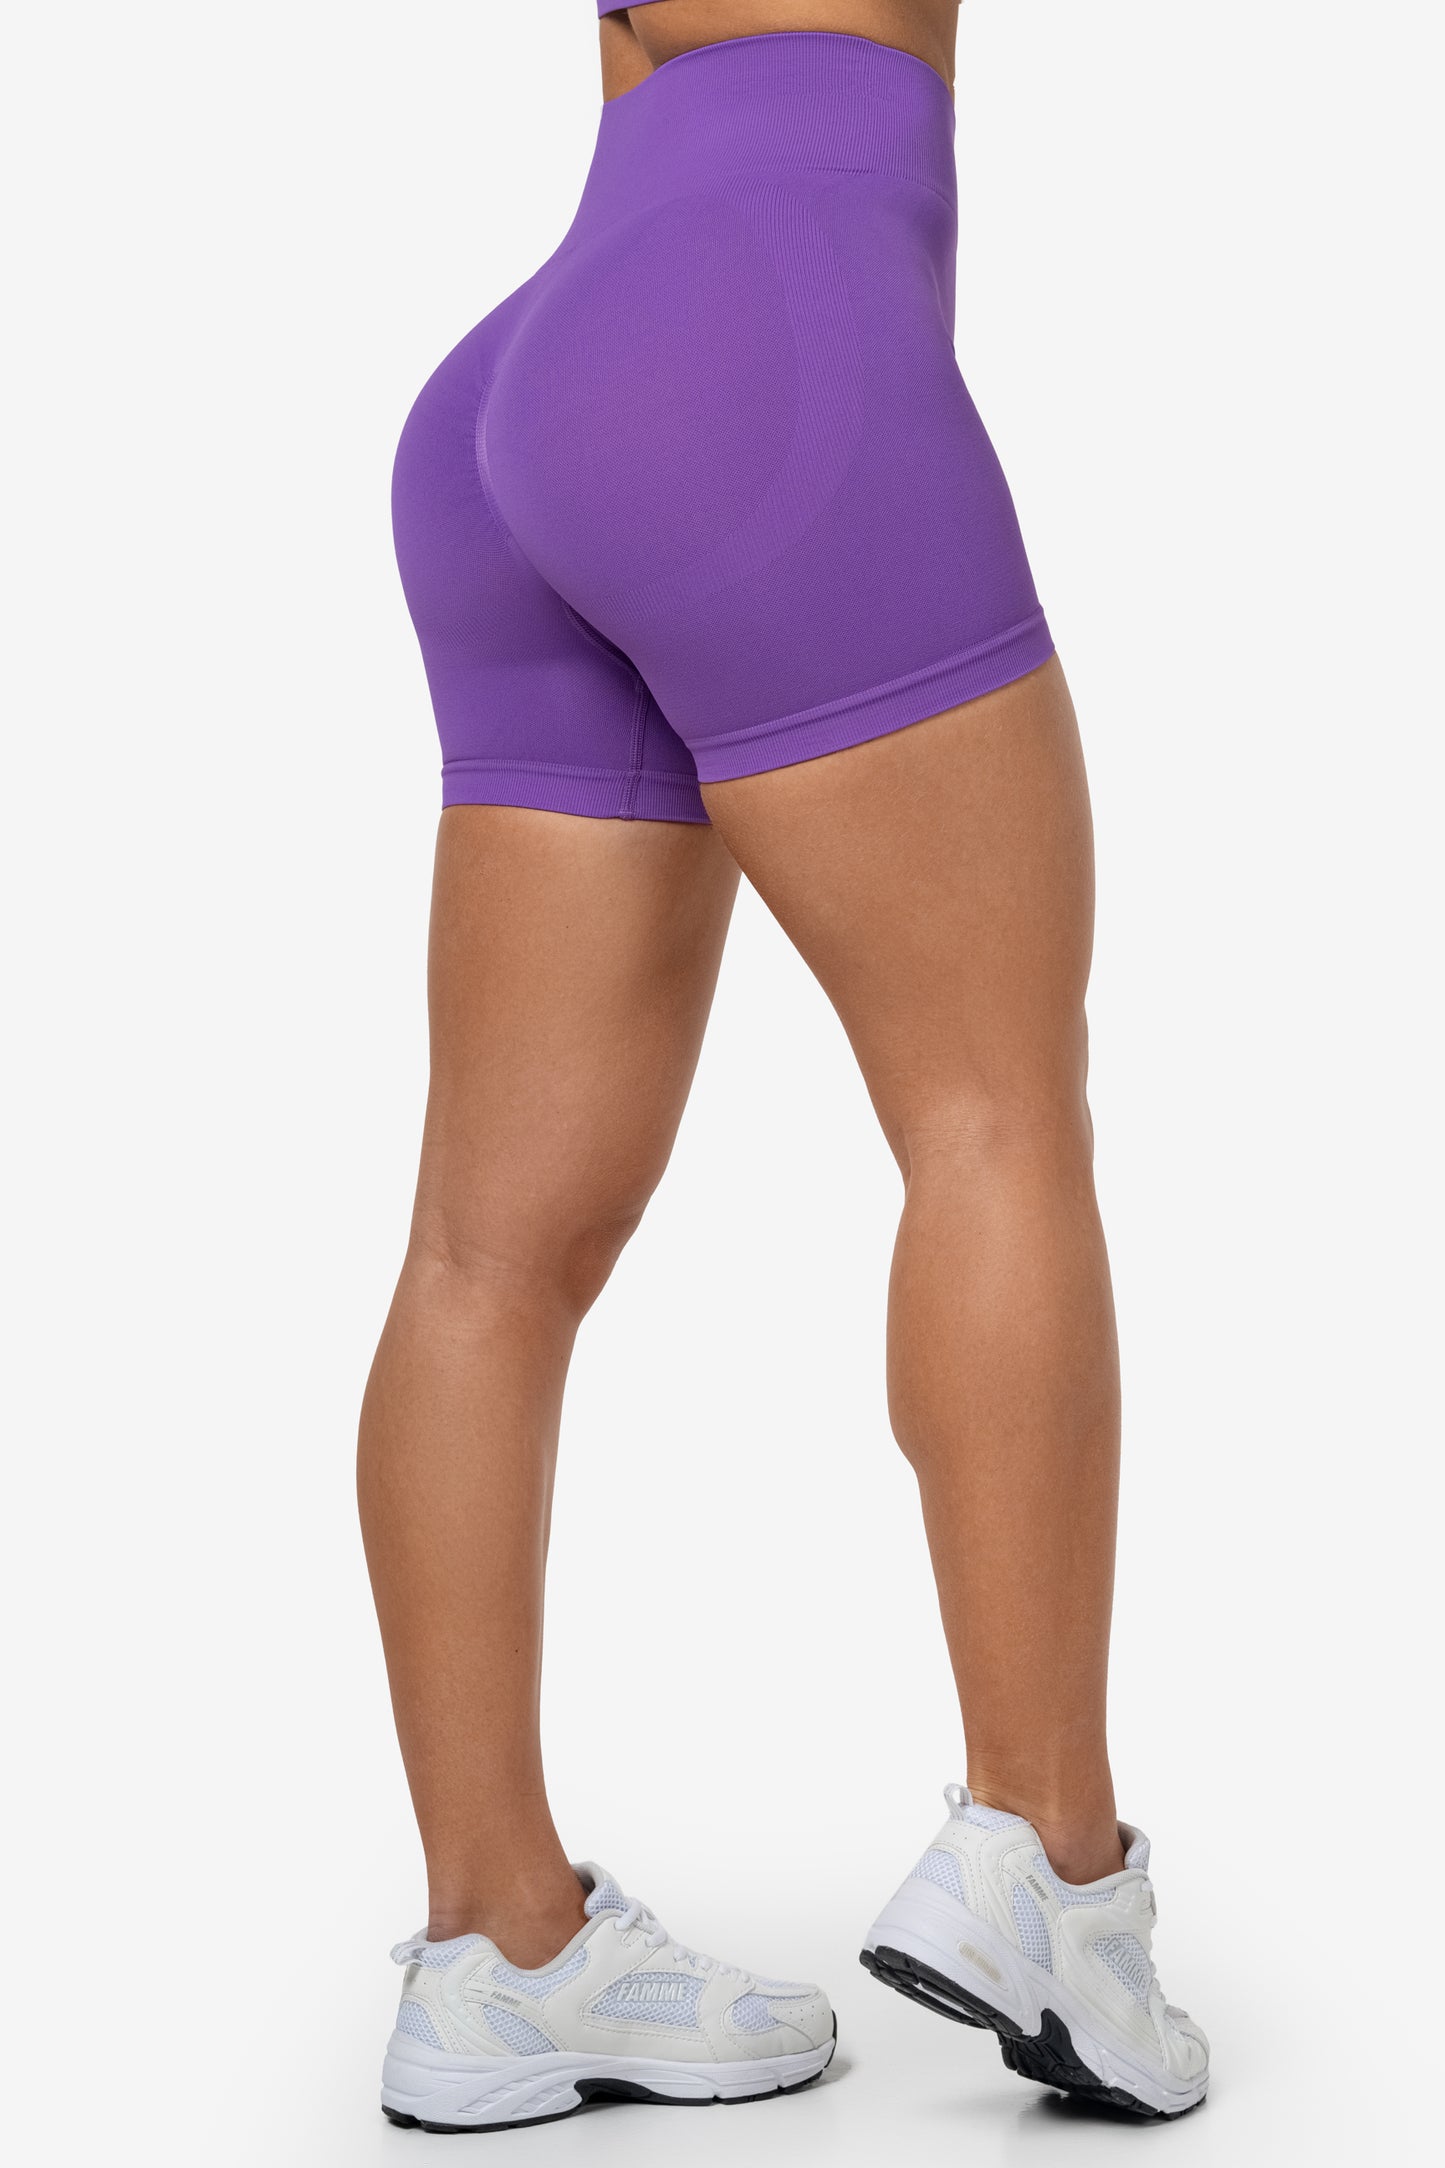 Purple Lunge Scrunch Shorts - for dame - Famme - Shorts